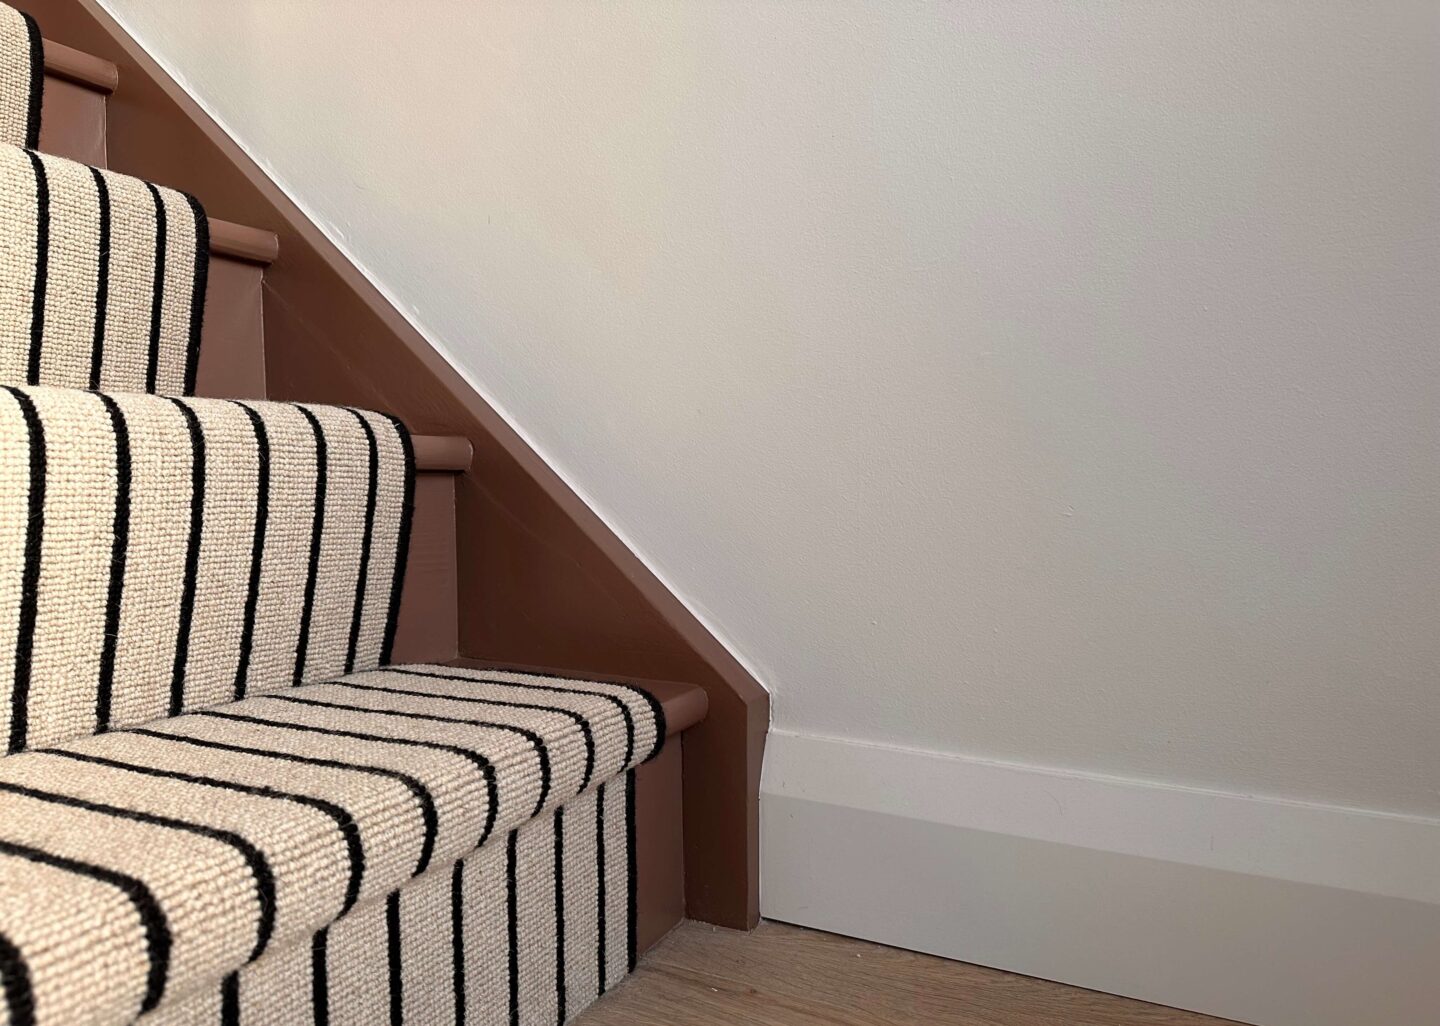 A black and cream striped carpet on a reddish-brown painted stairs.